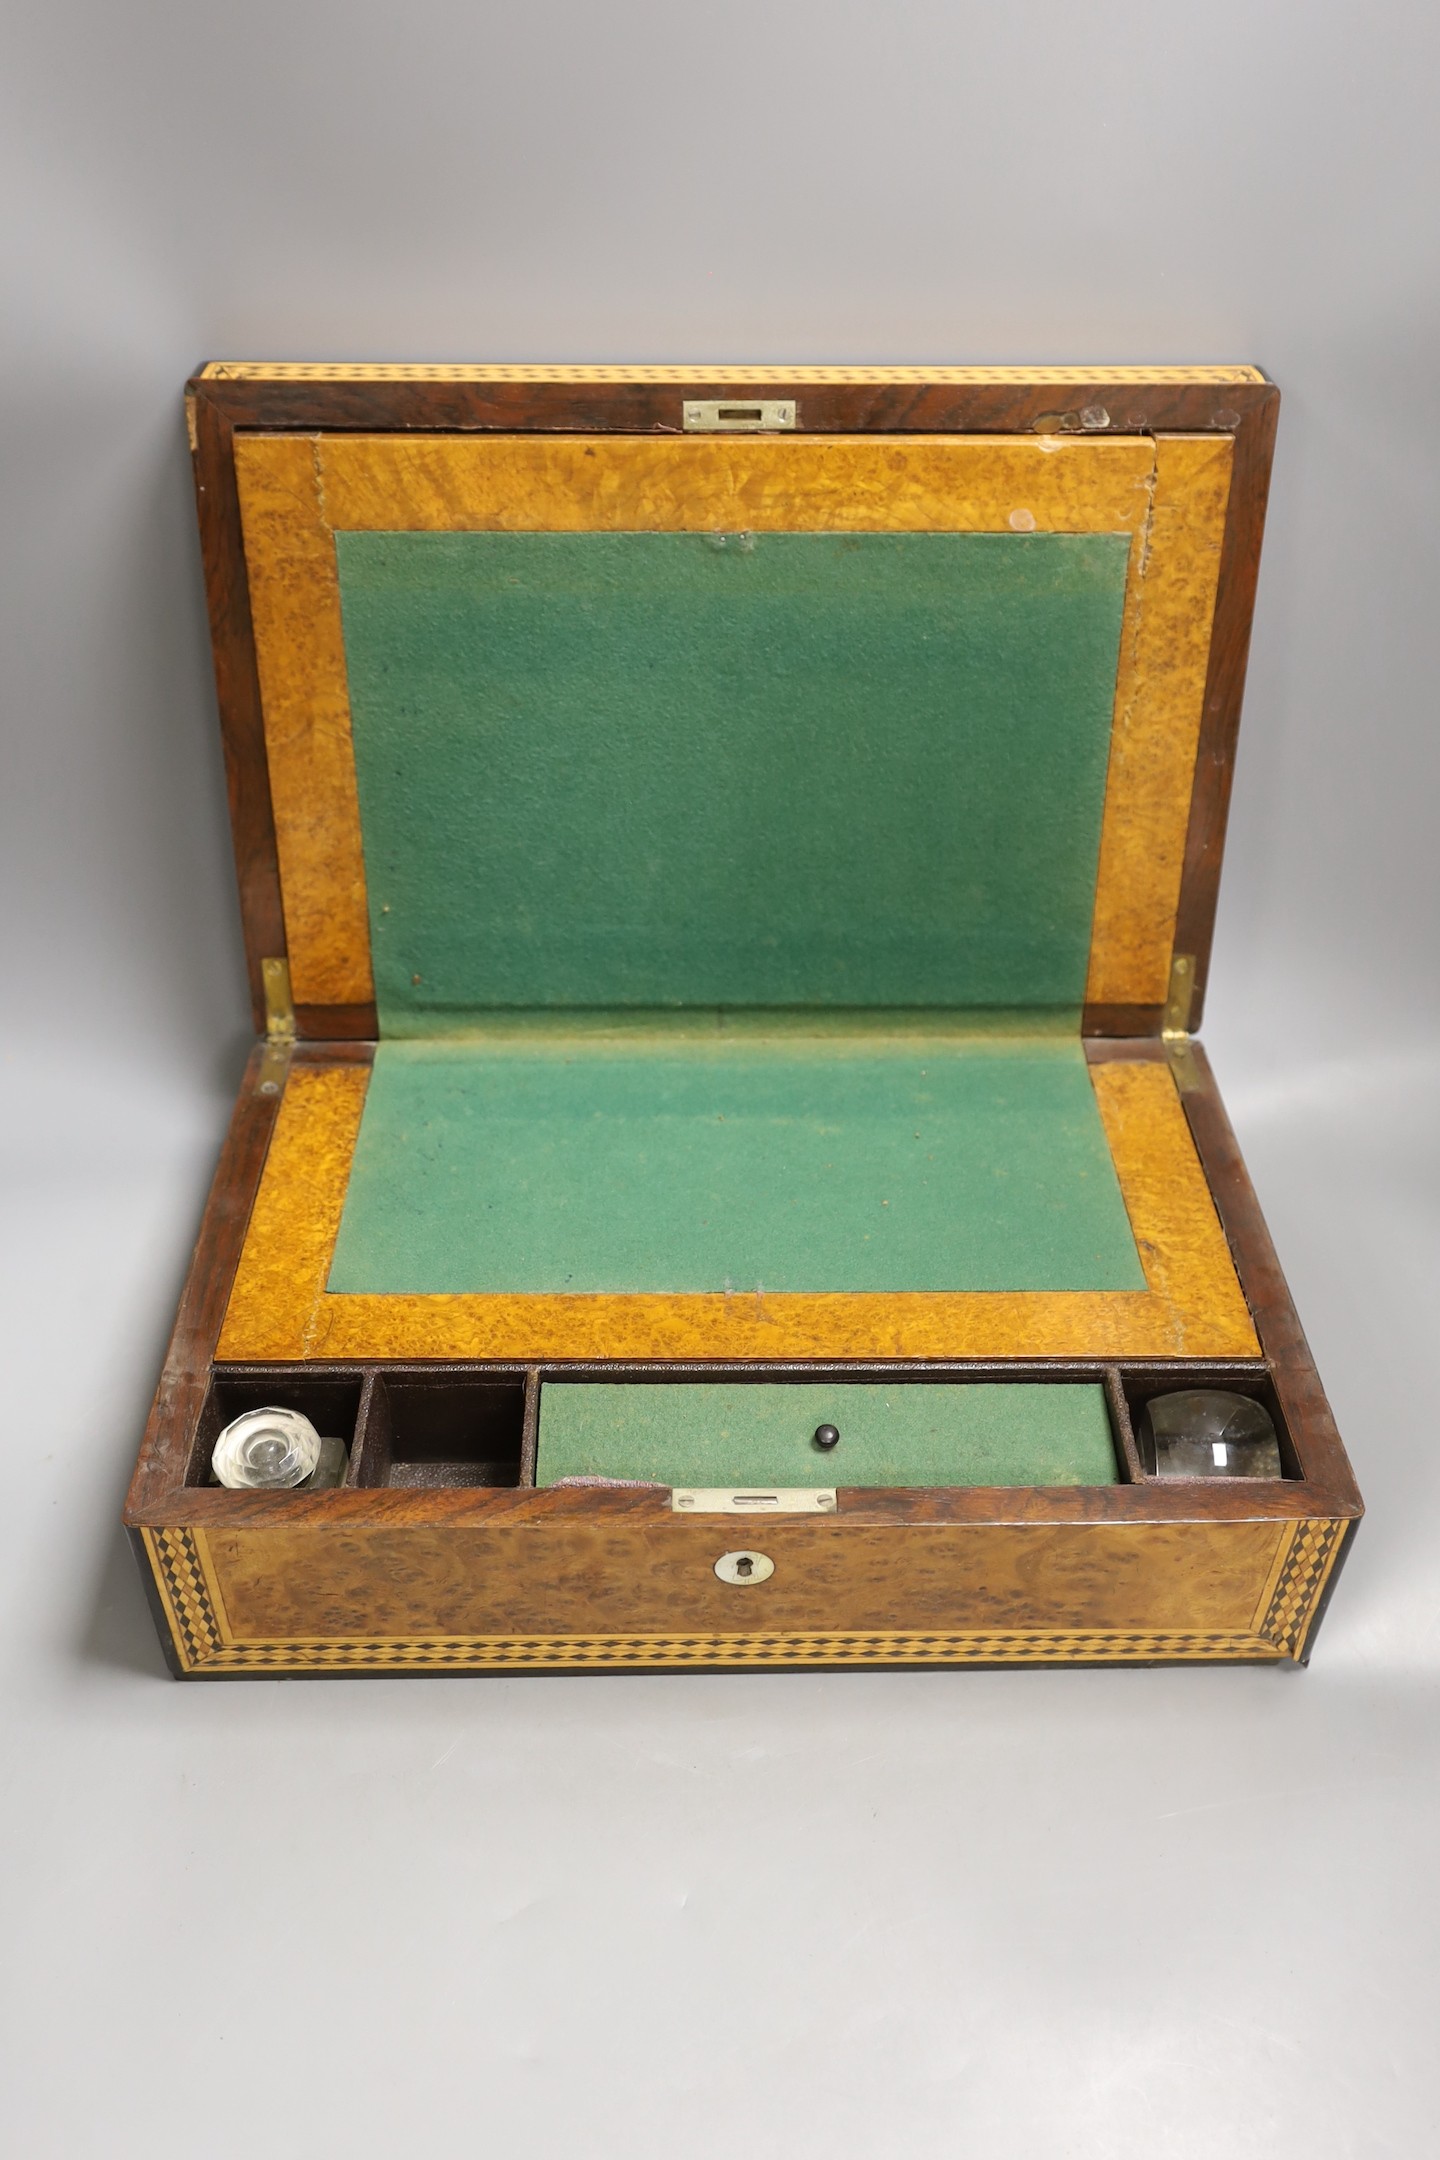 A 19th century walnut and marquetry writing slope - 38cm